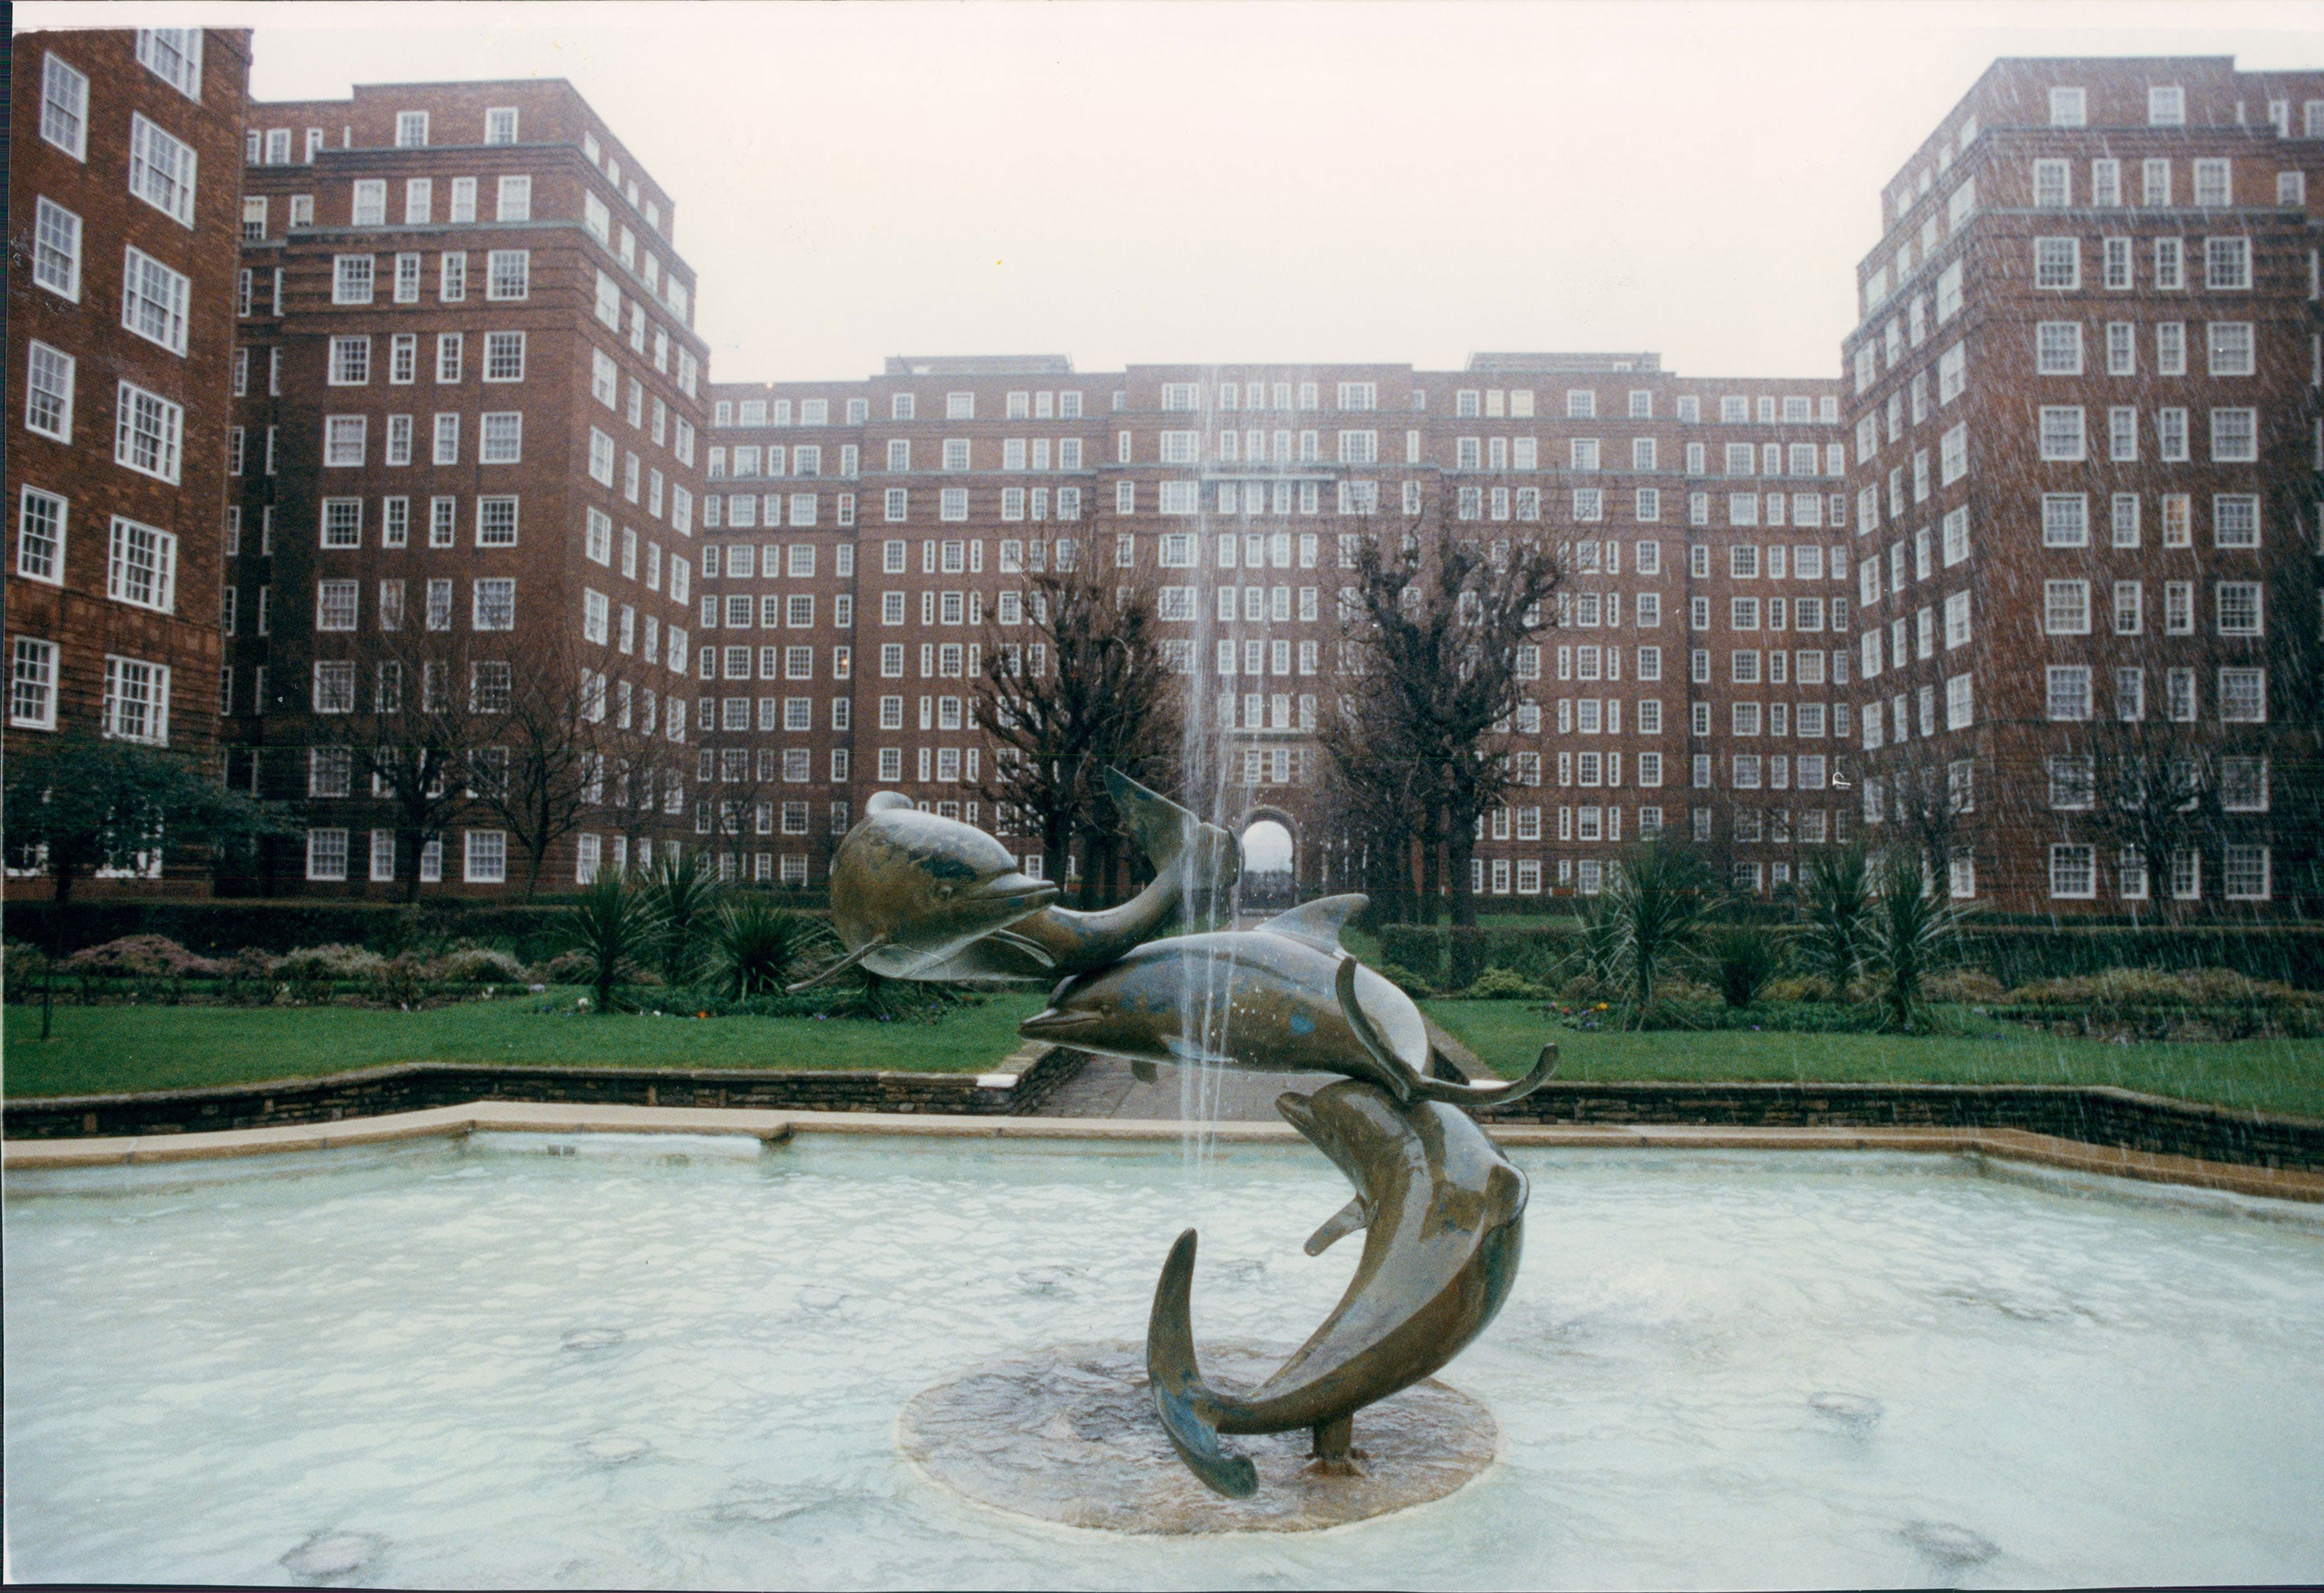 Dolphin Square in Pimlico, London, one of the locations where the "abuse parties" are alleged to have taken place 